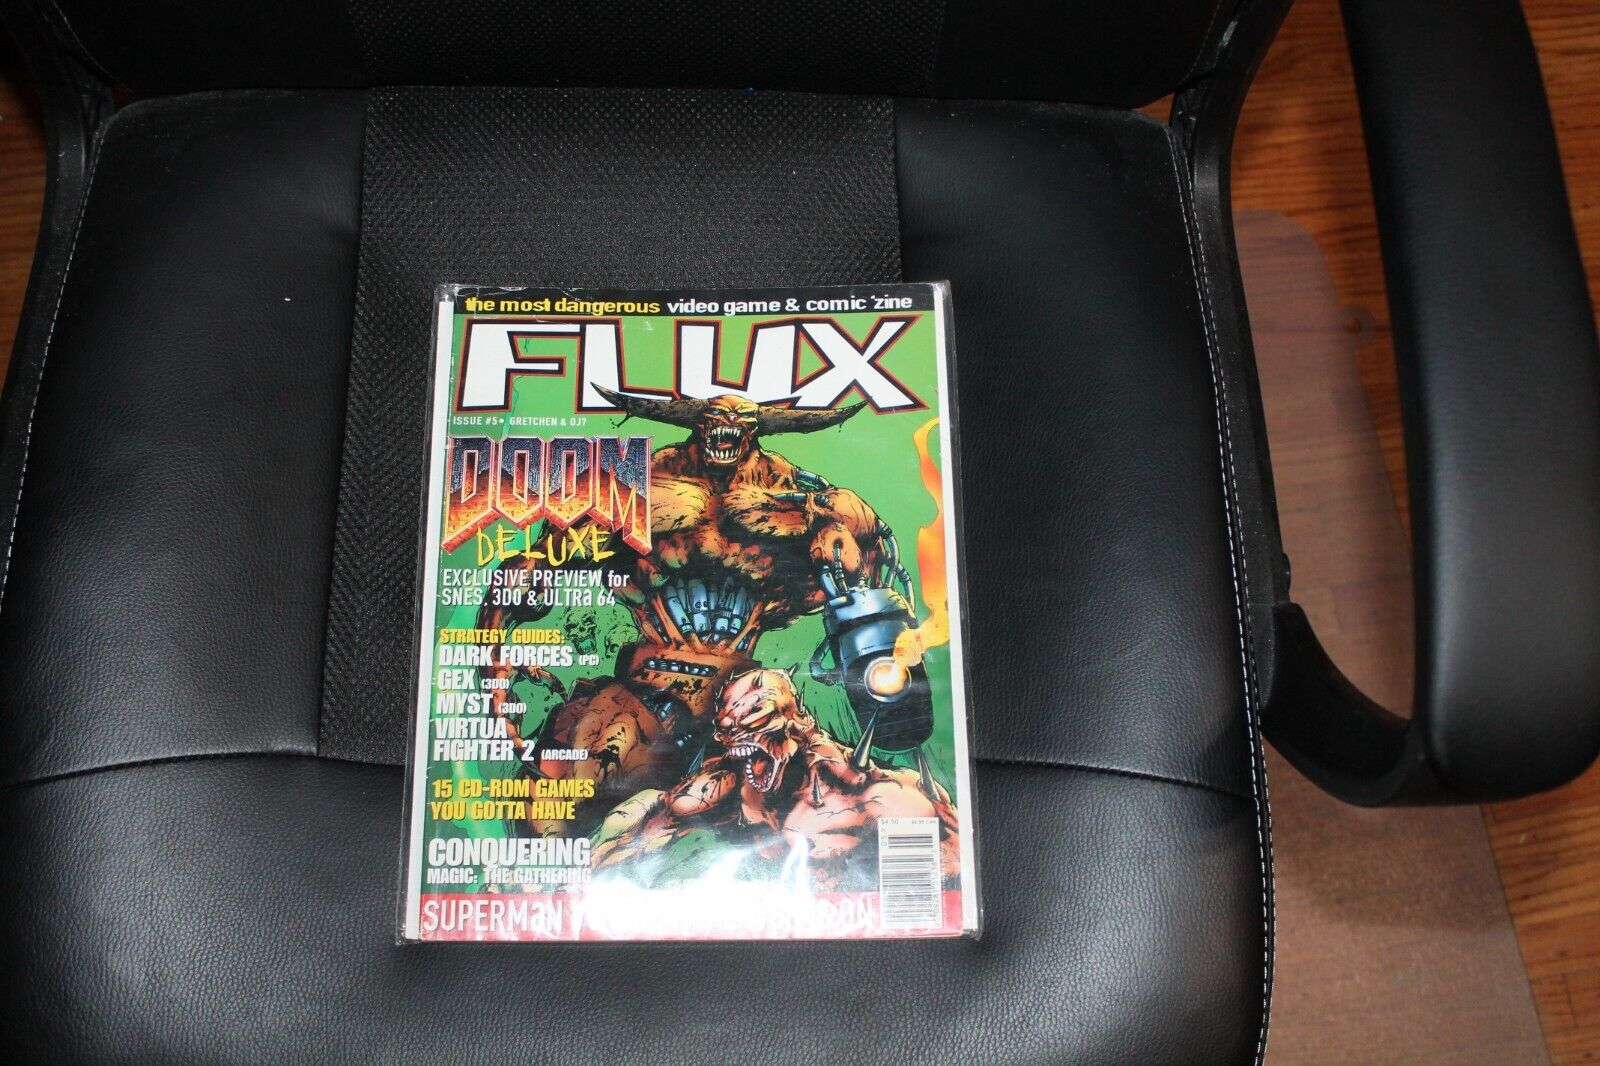 FLUX Video Game/ Comics Magazine Issue #5 Sept. 1995 Doom Deluxe BAGGED BOARDED